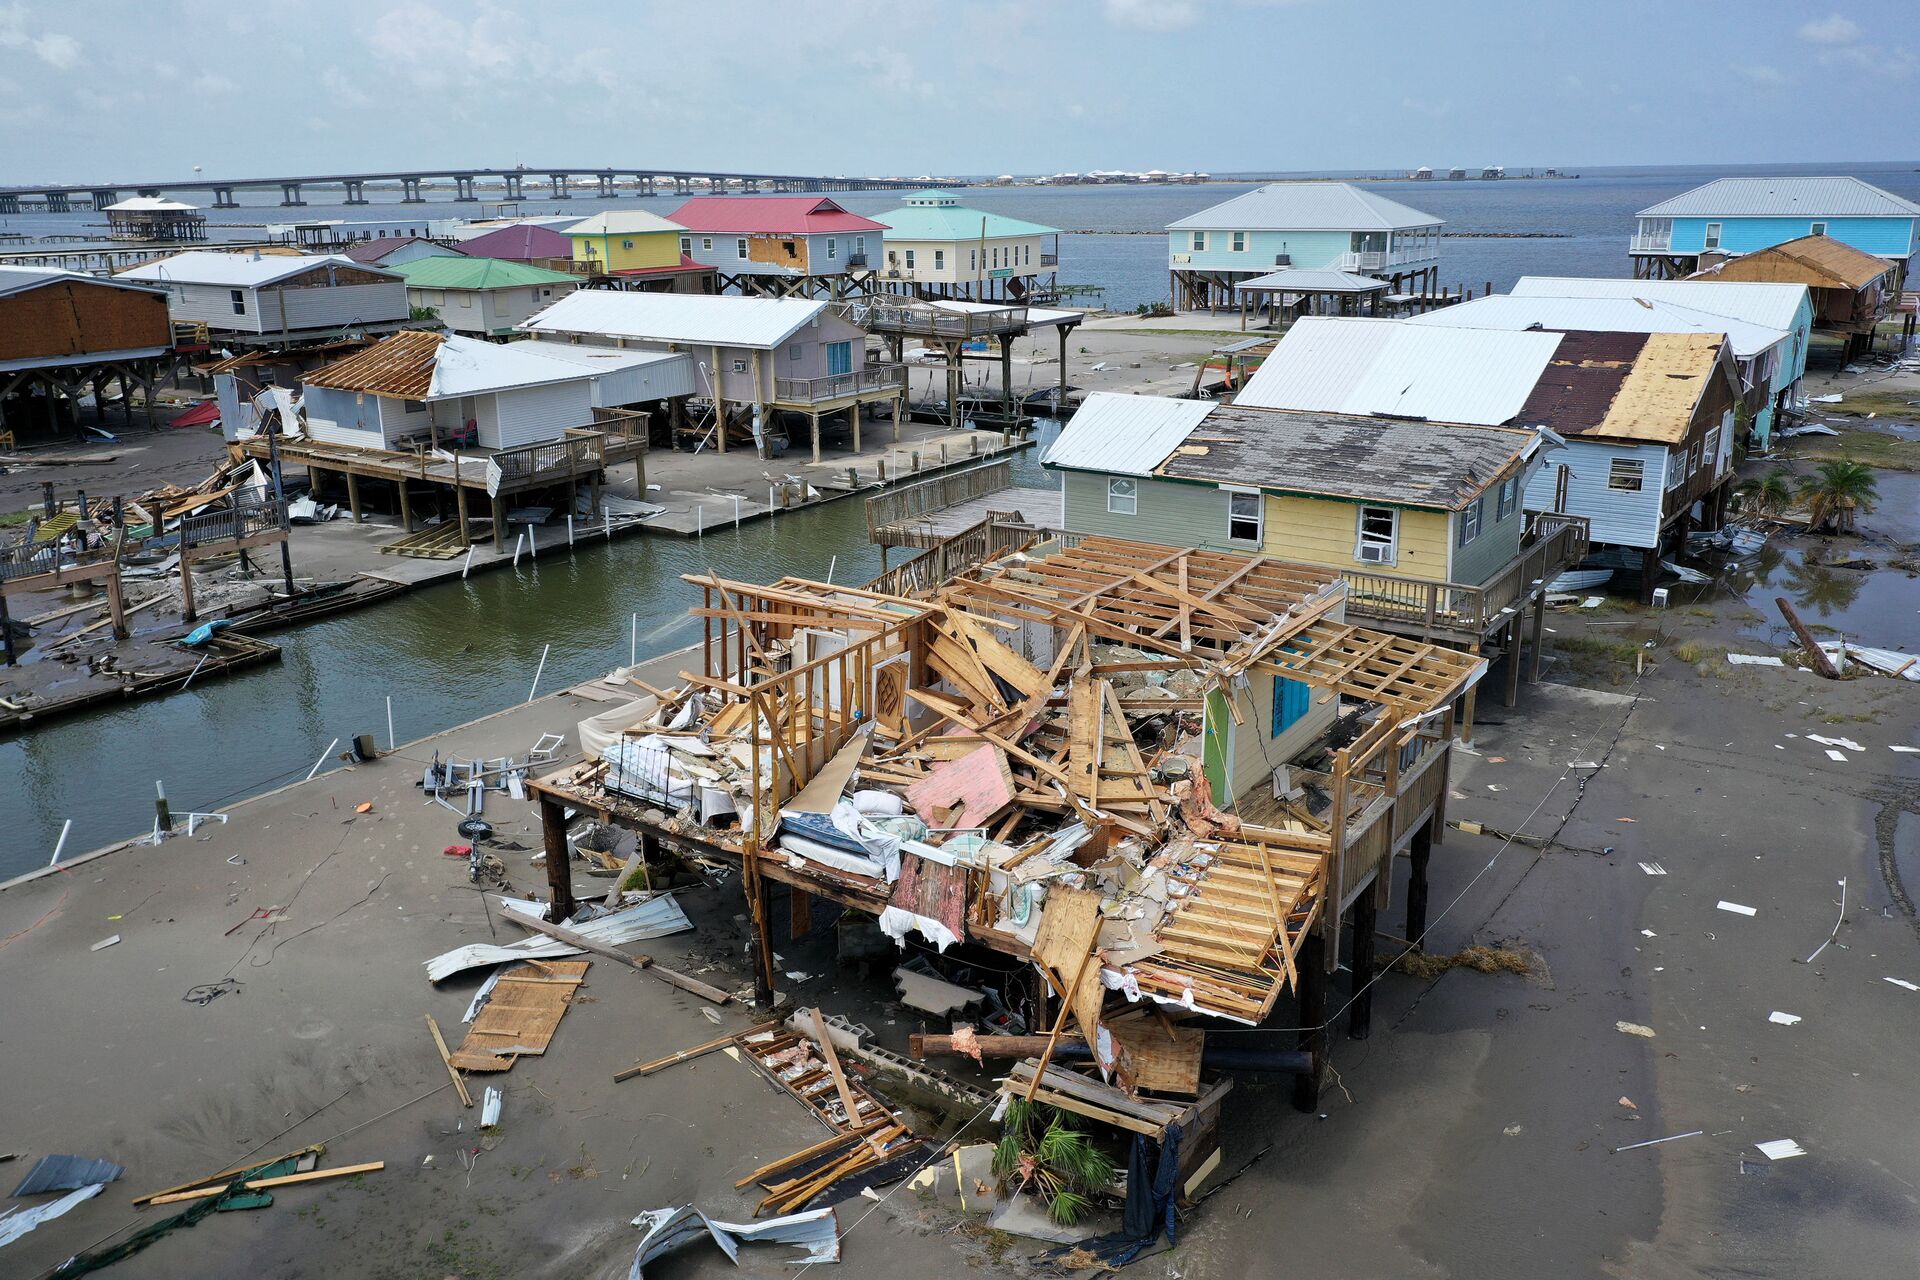 Homes destroyed in the wake of Hurricane Ida are shown September 2, 2021 in Grand Isle, Louisiana. Ida made landfall August 29 as a Category 4 storm near Grand Isle, southwest of New Orleans, causing widespread power outages, flooding and massive damage.   - Sputnik International, 1920, 07.09.2021